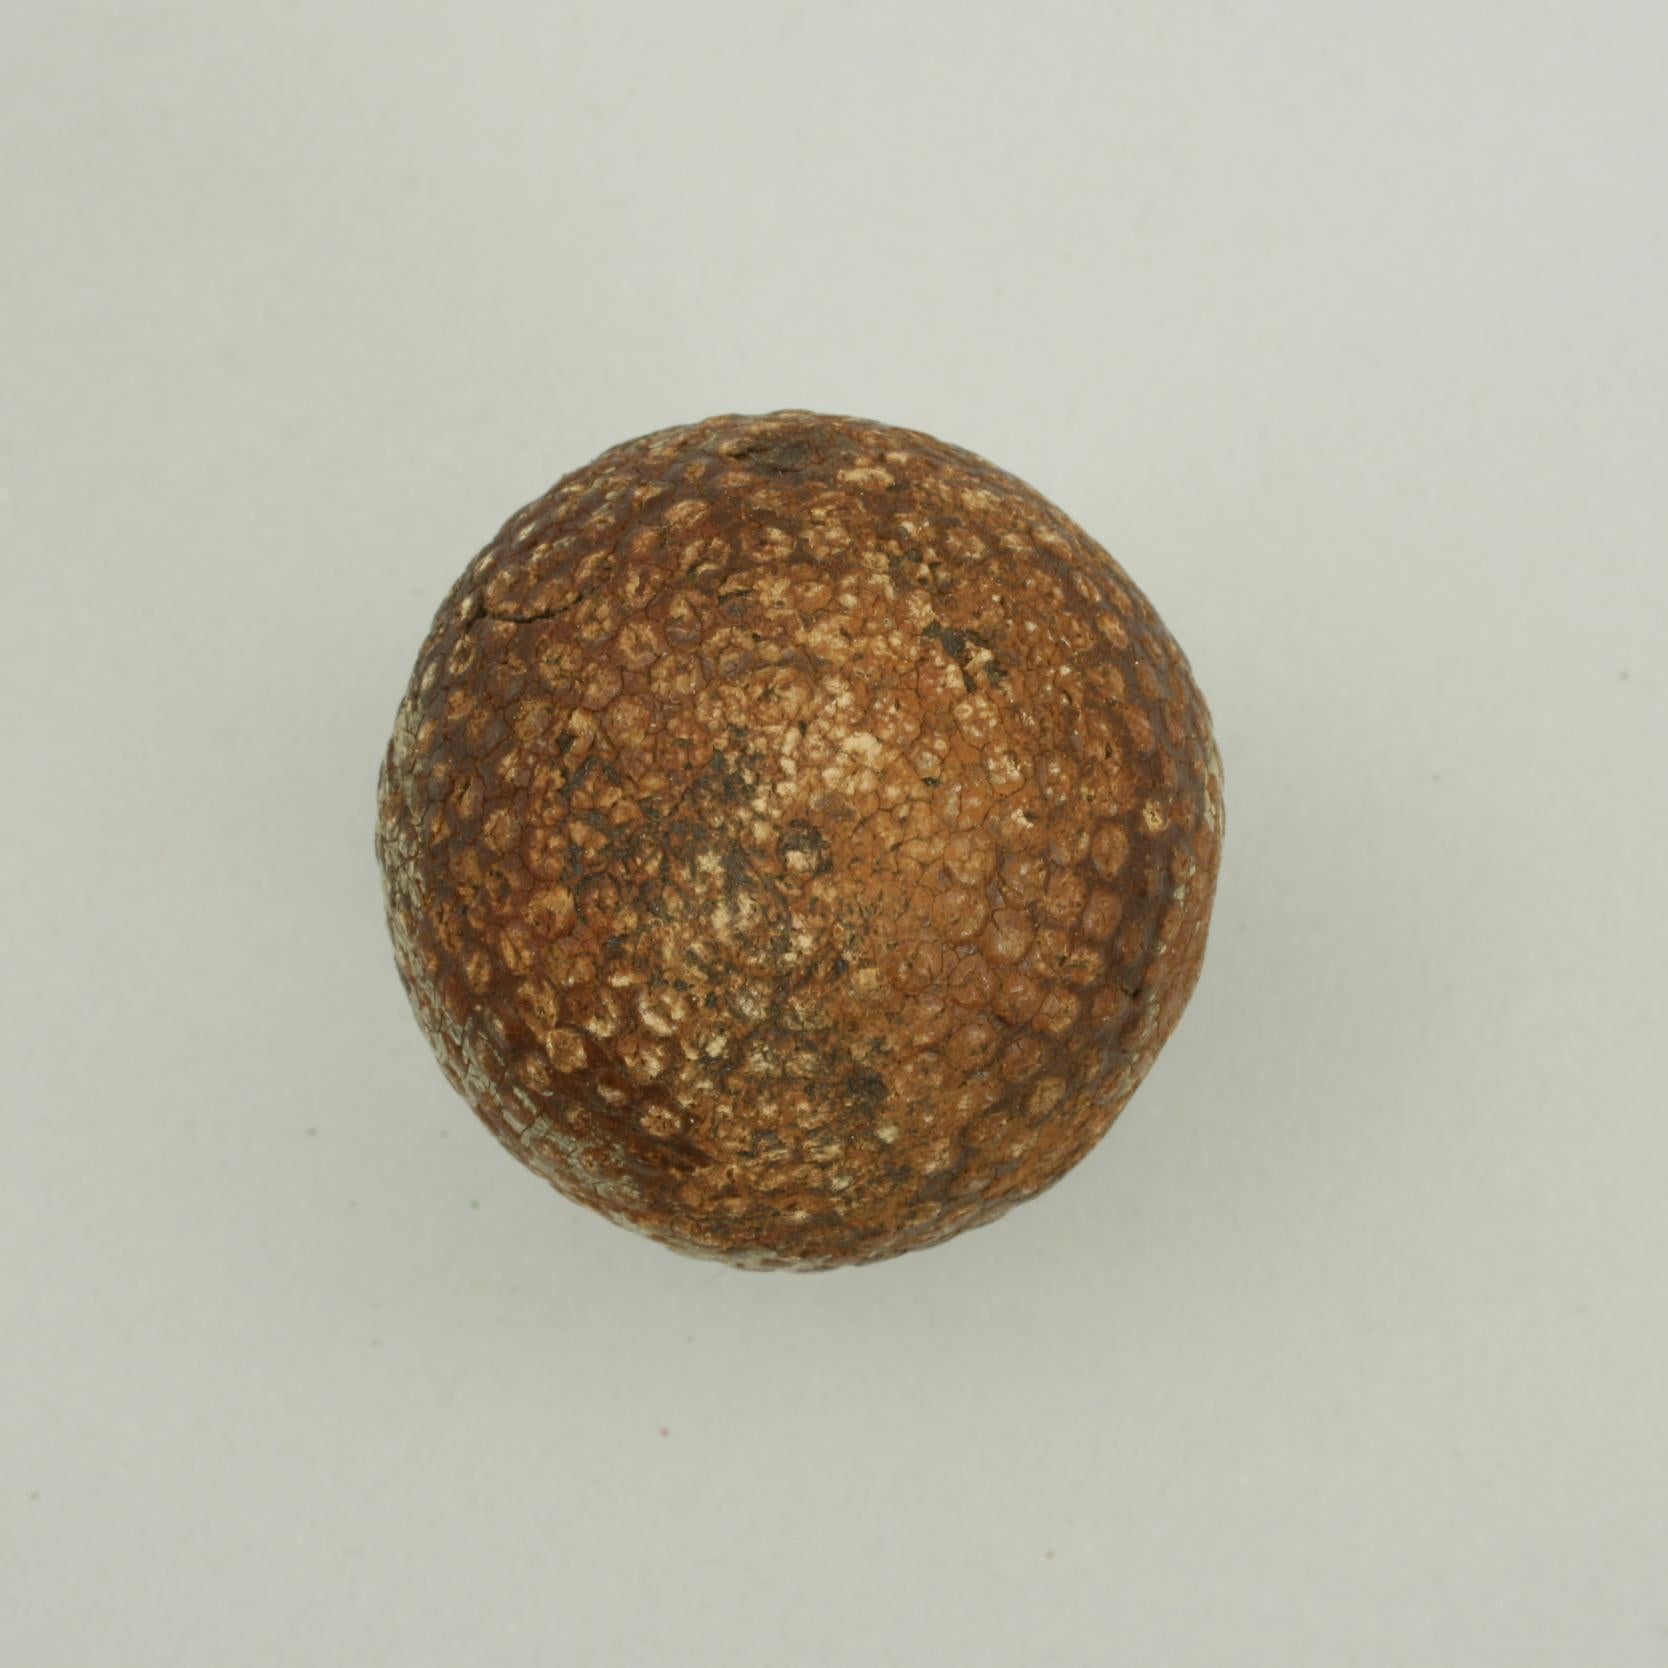 Bramble Golf Ball.
A bramble patterned golf ball. The ball is named but is very difficult to read but appears to be 'The H..p…'. The ball is of classic bramble pattern with raised dimples but not in great condition.

The ball is approximately 1 5/8